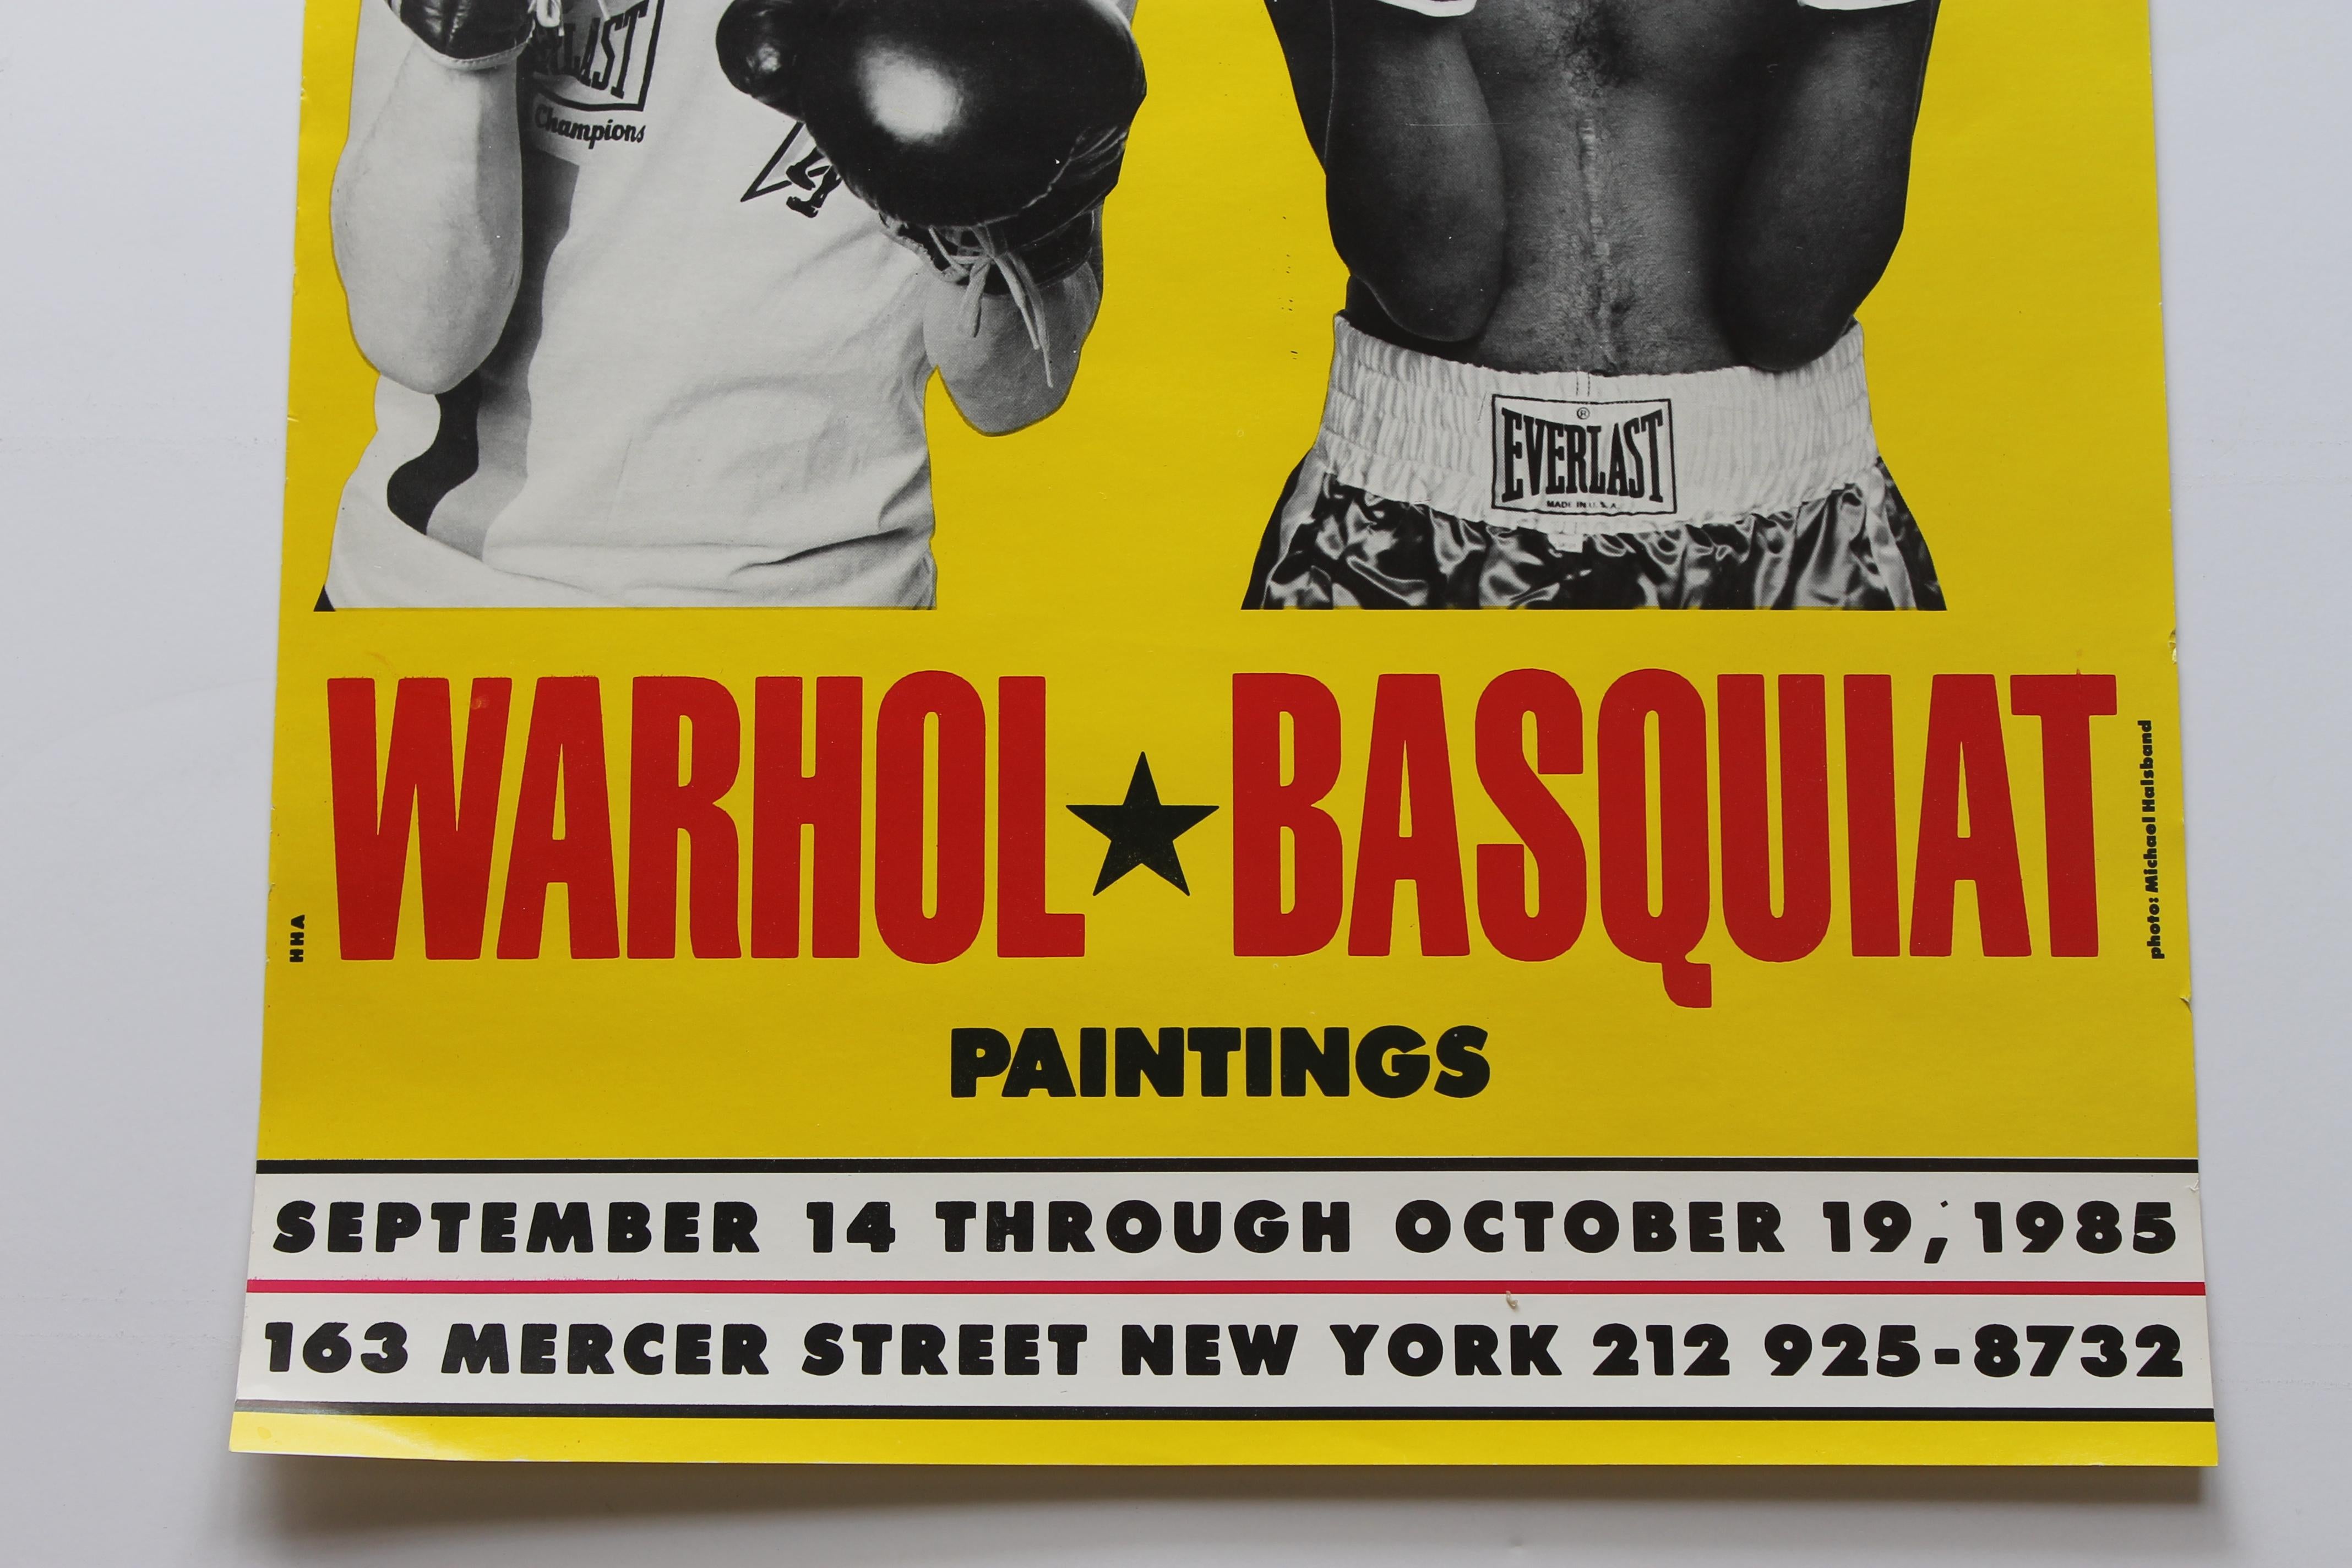 andy warhol basquiat poster